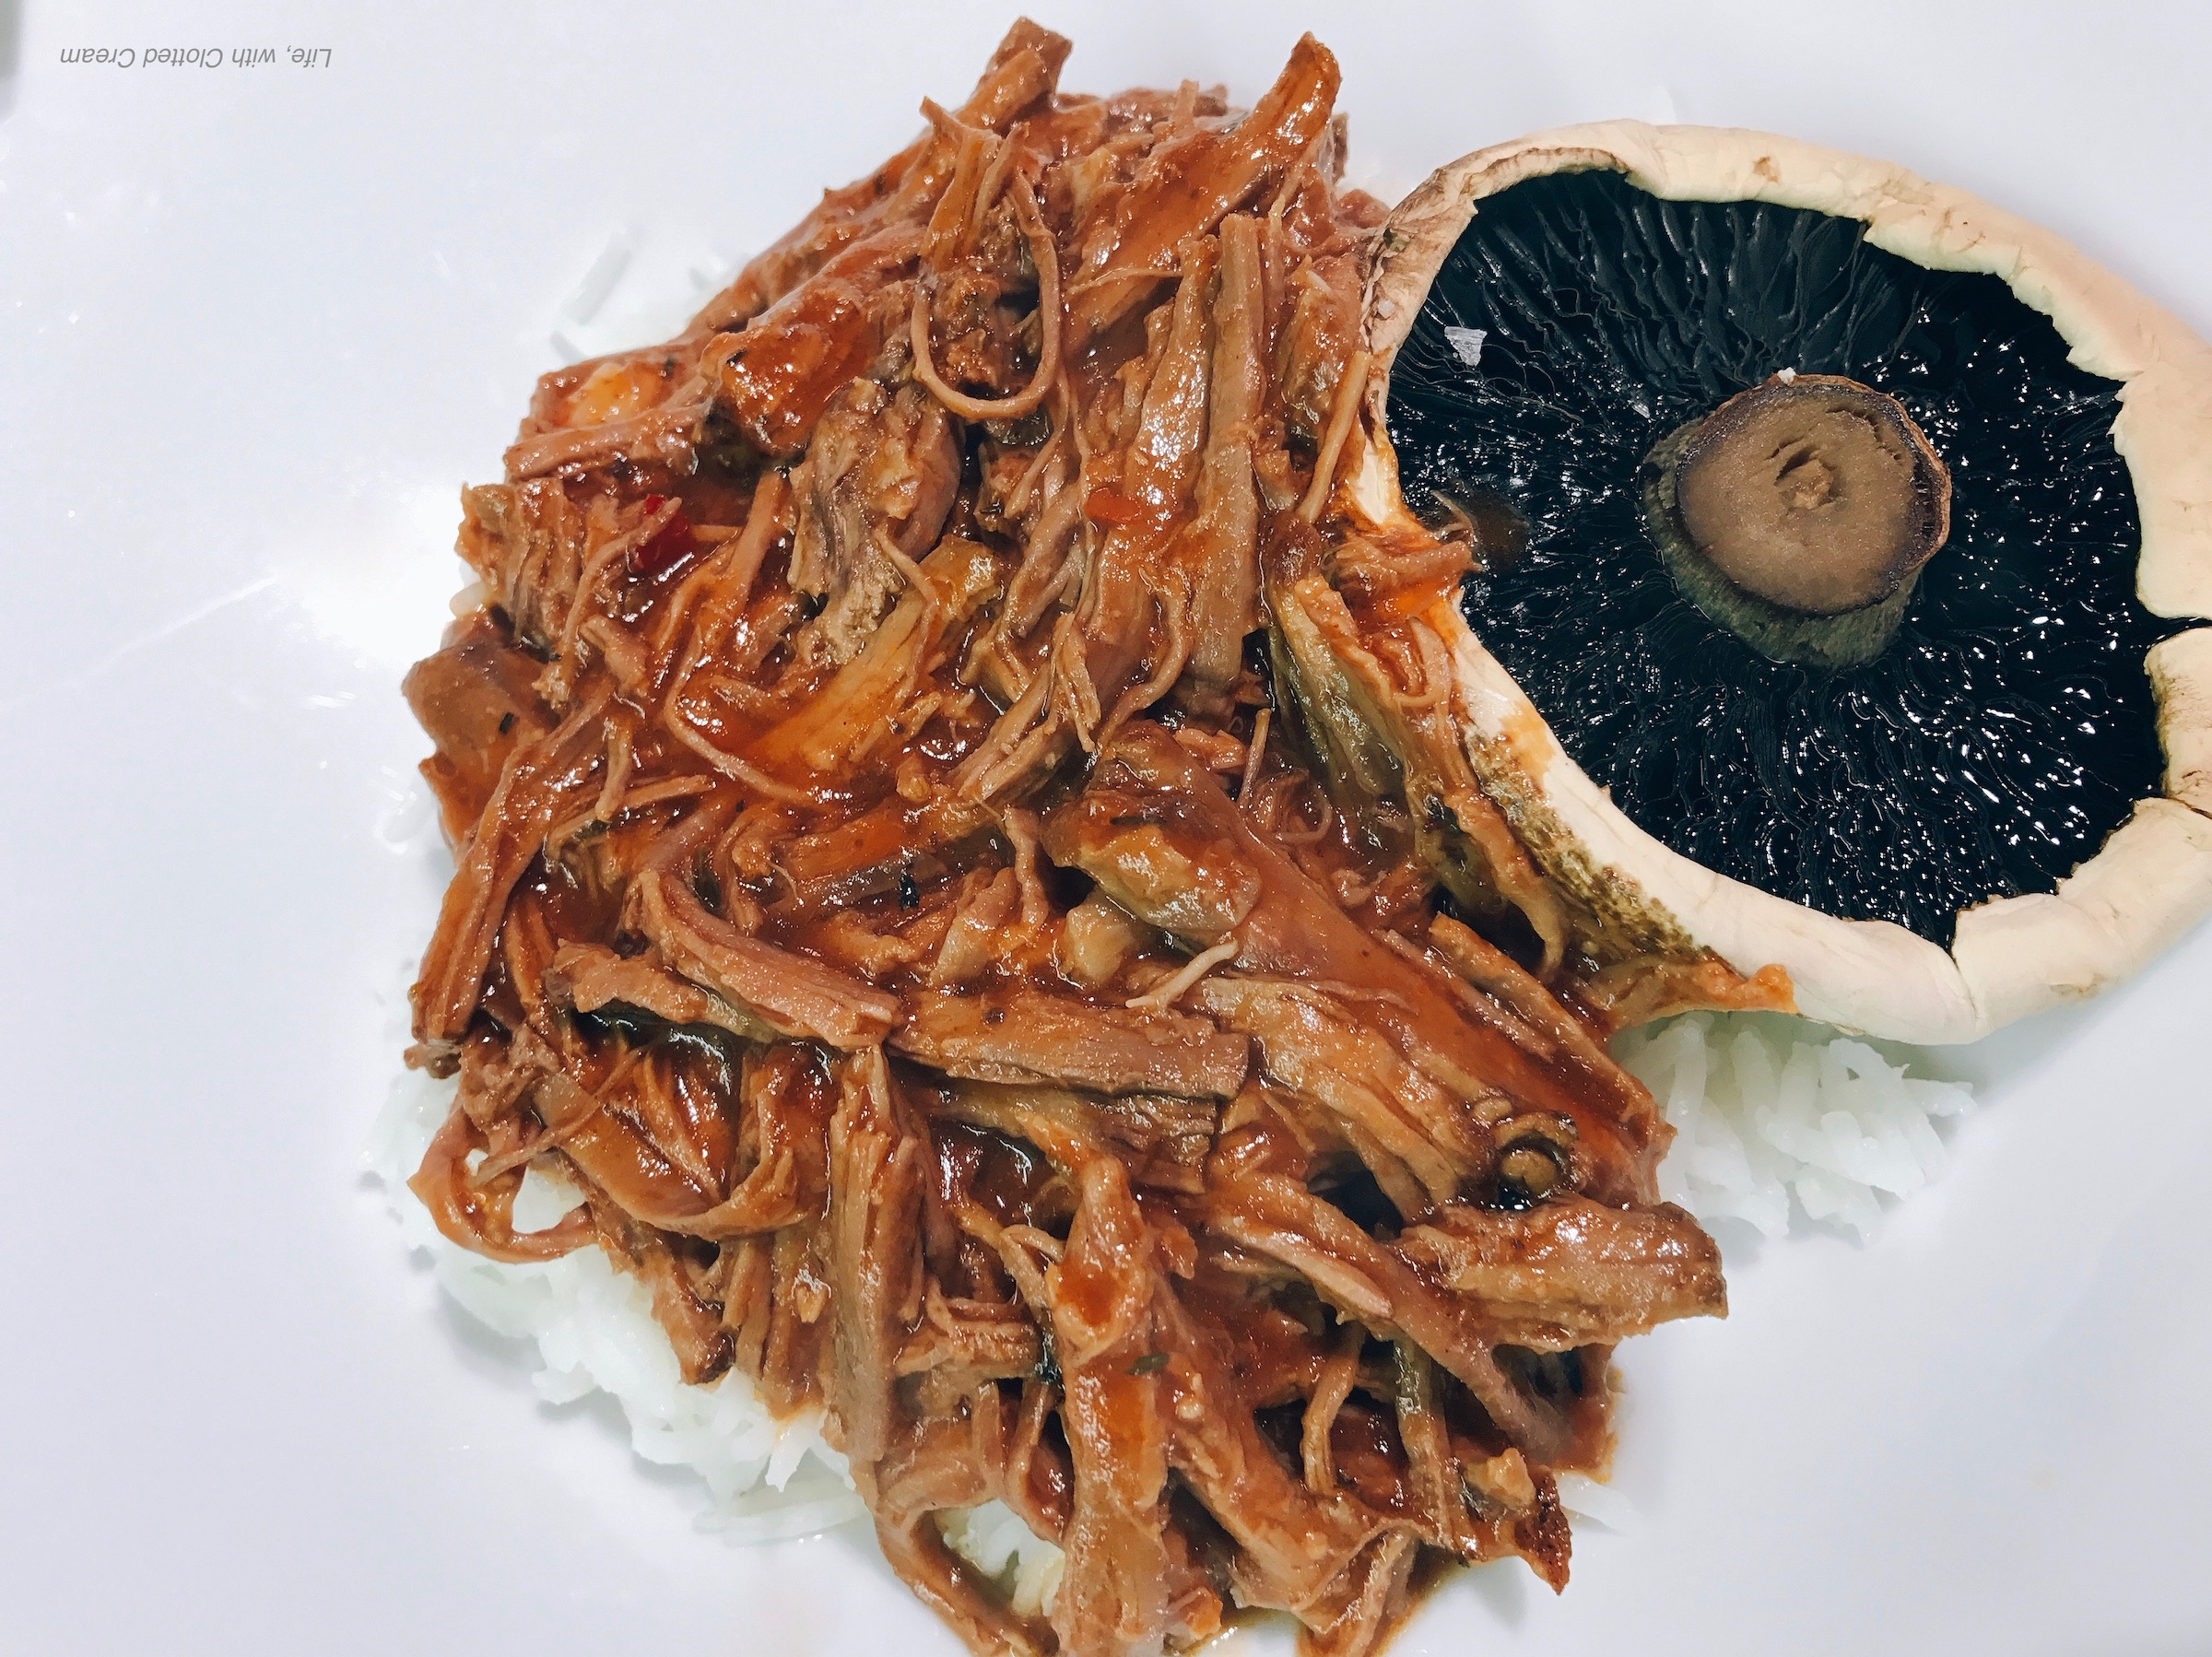 Pulled beef with flat mushroom